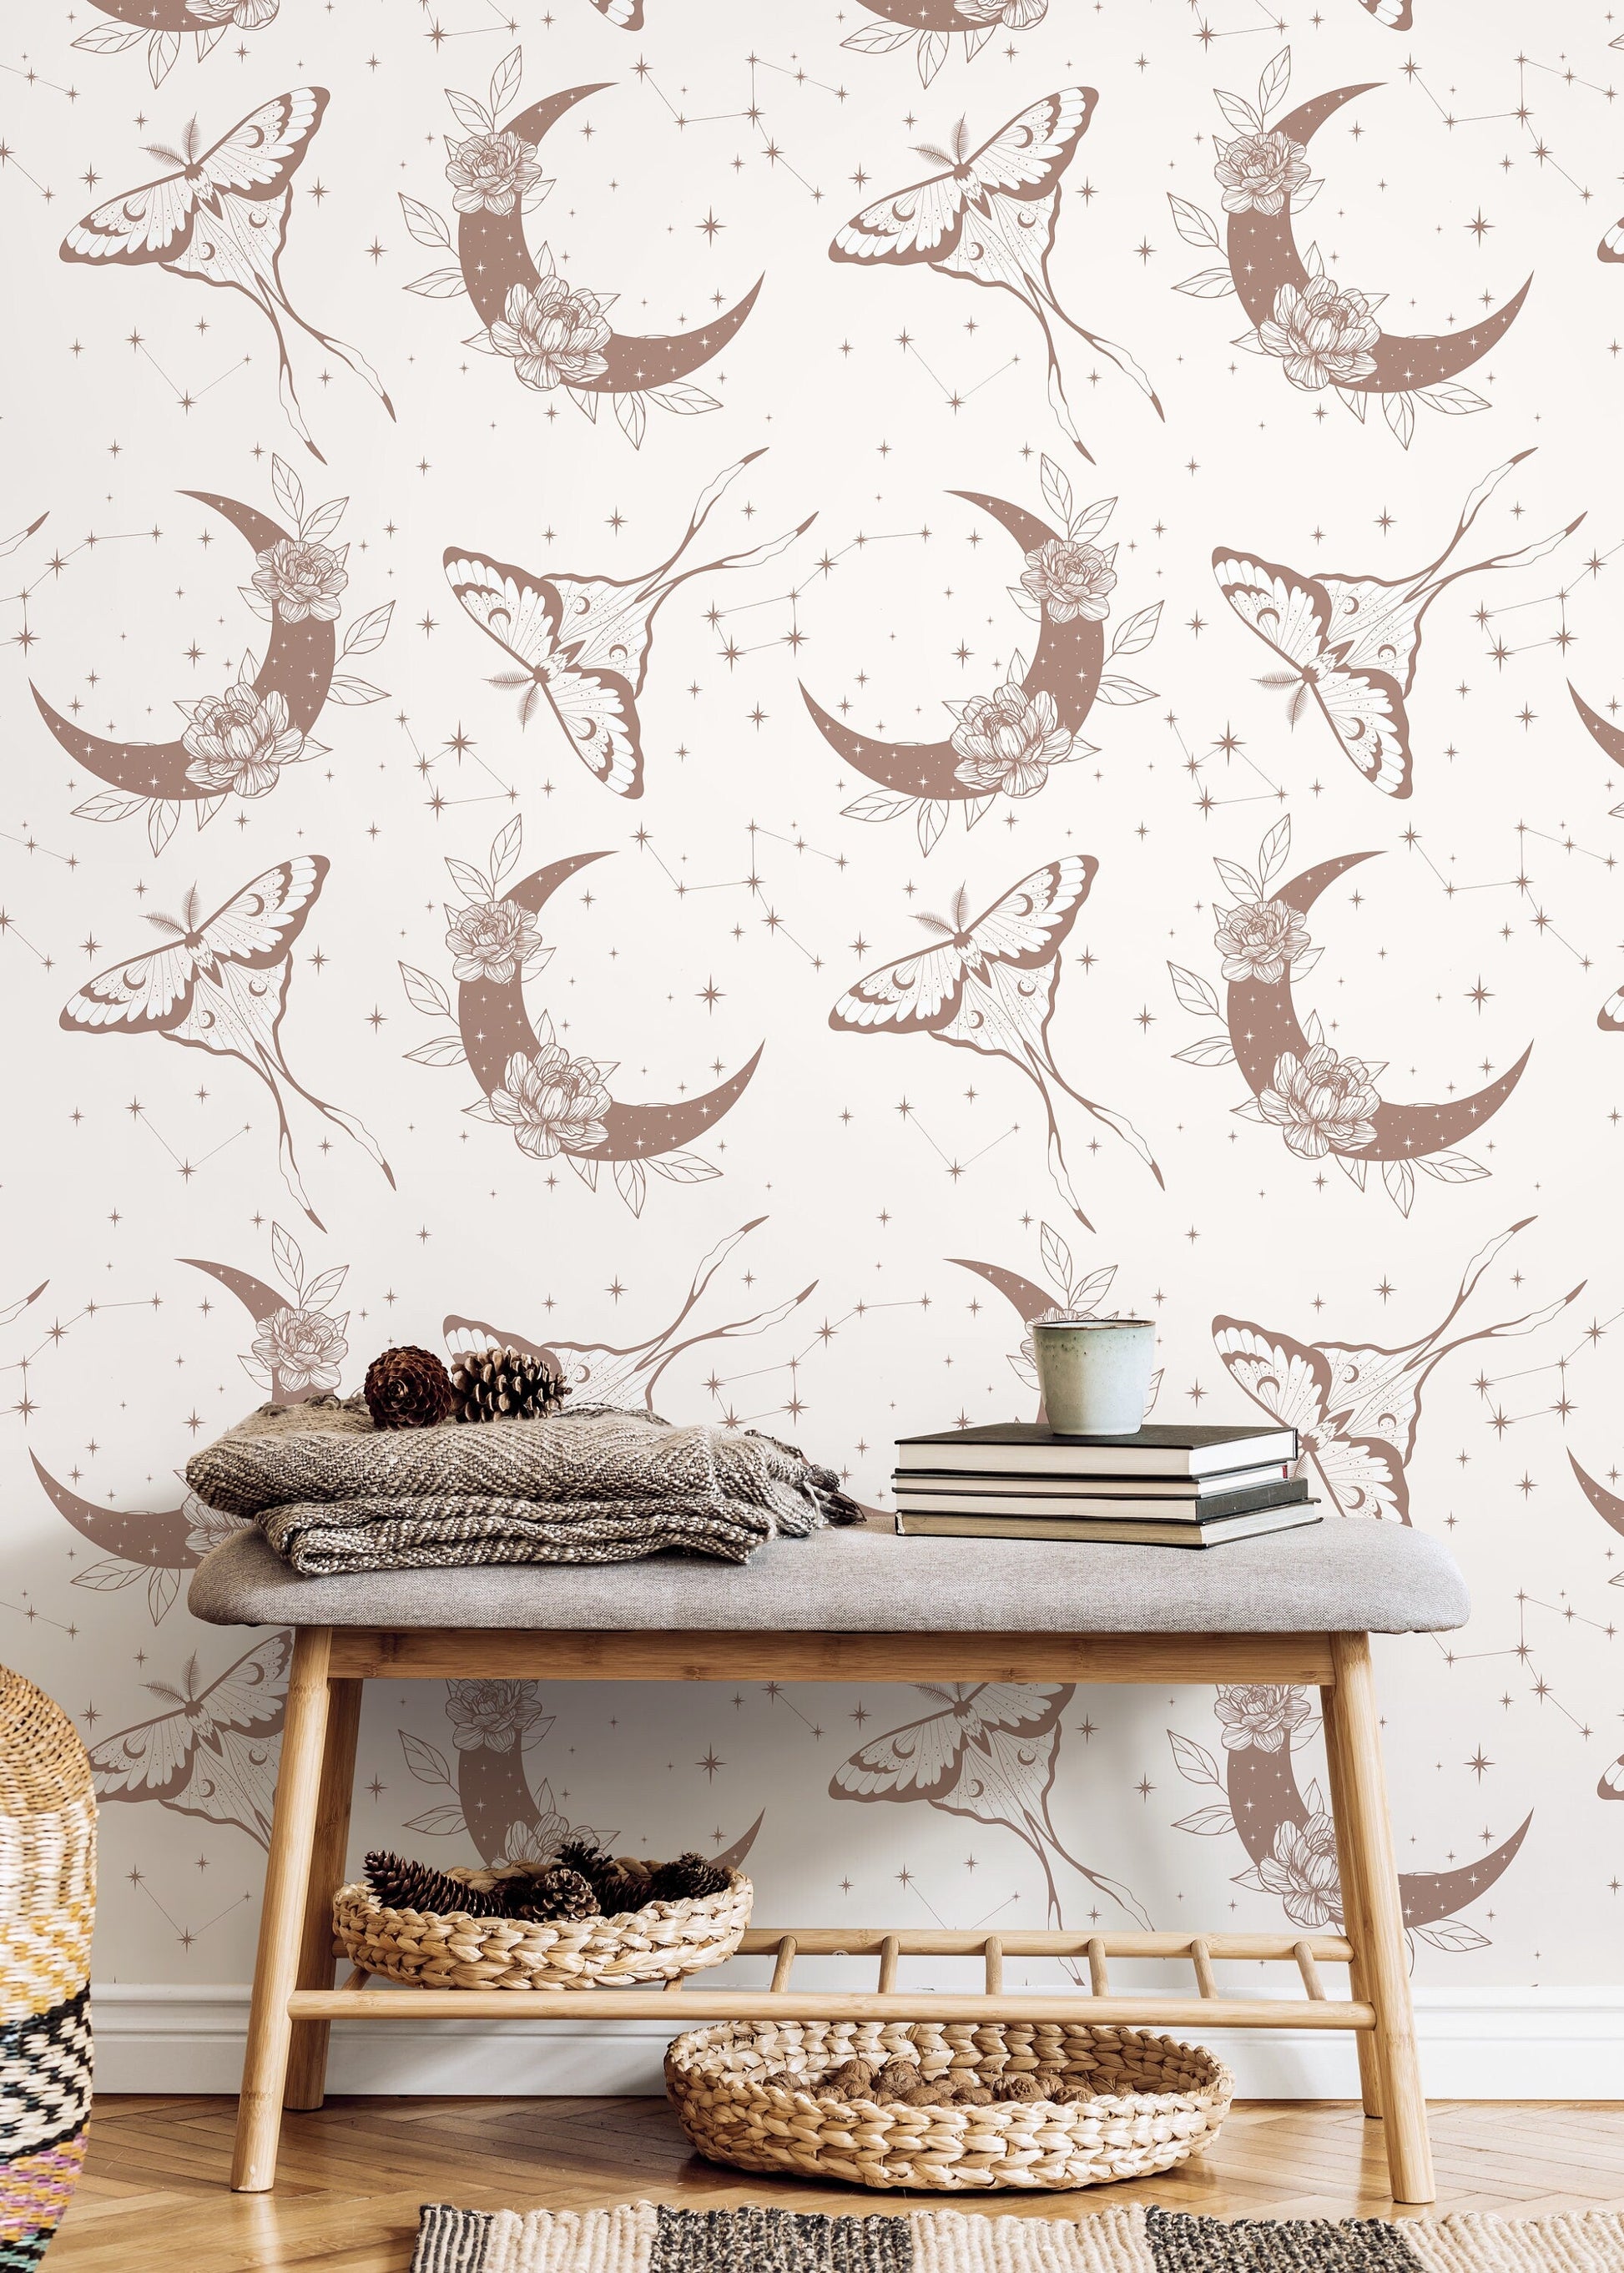 Mystique and Celestial Wallpaper Removable Peel and Stick Wallpaper, Peel and Stick Wallpaper Moon and Butterfly - ZACT